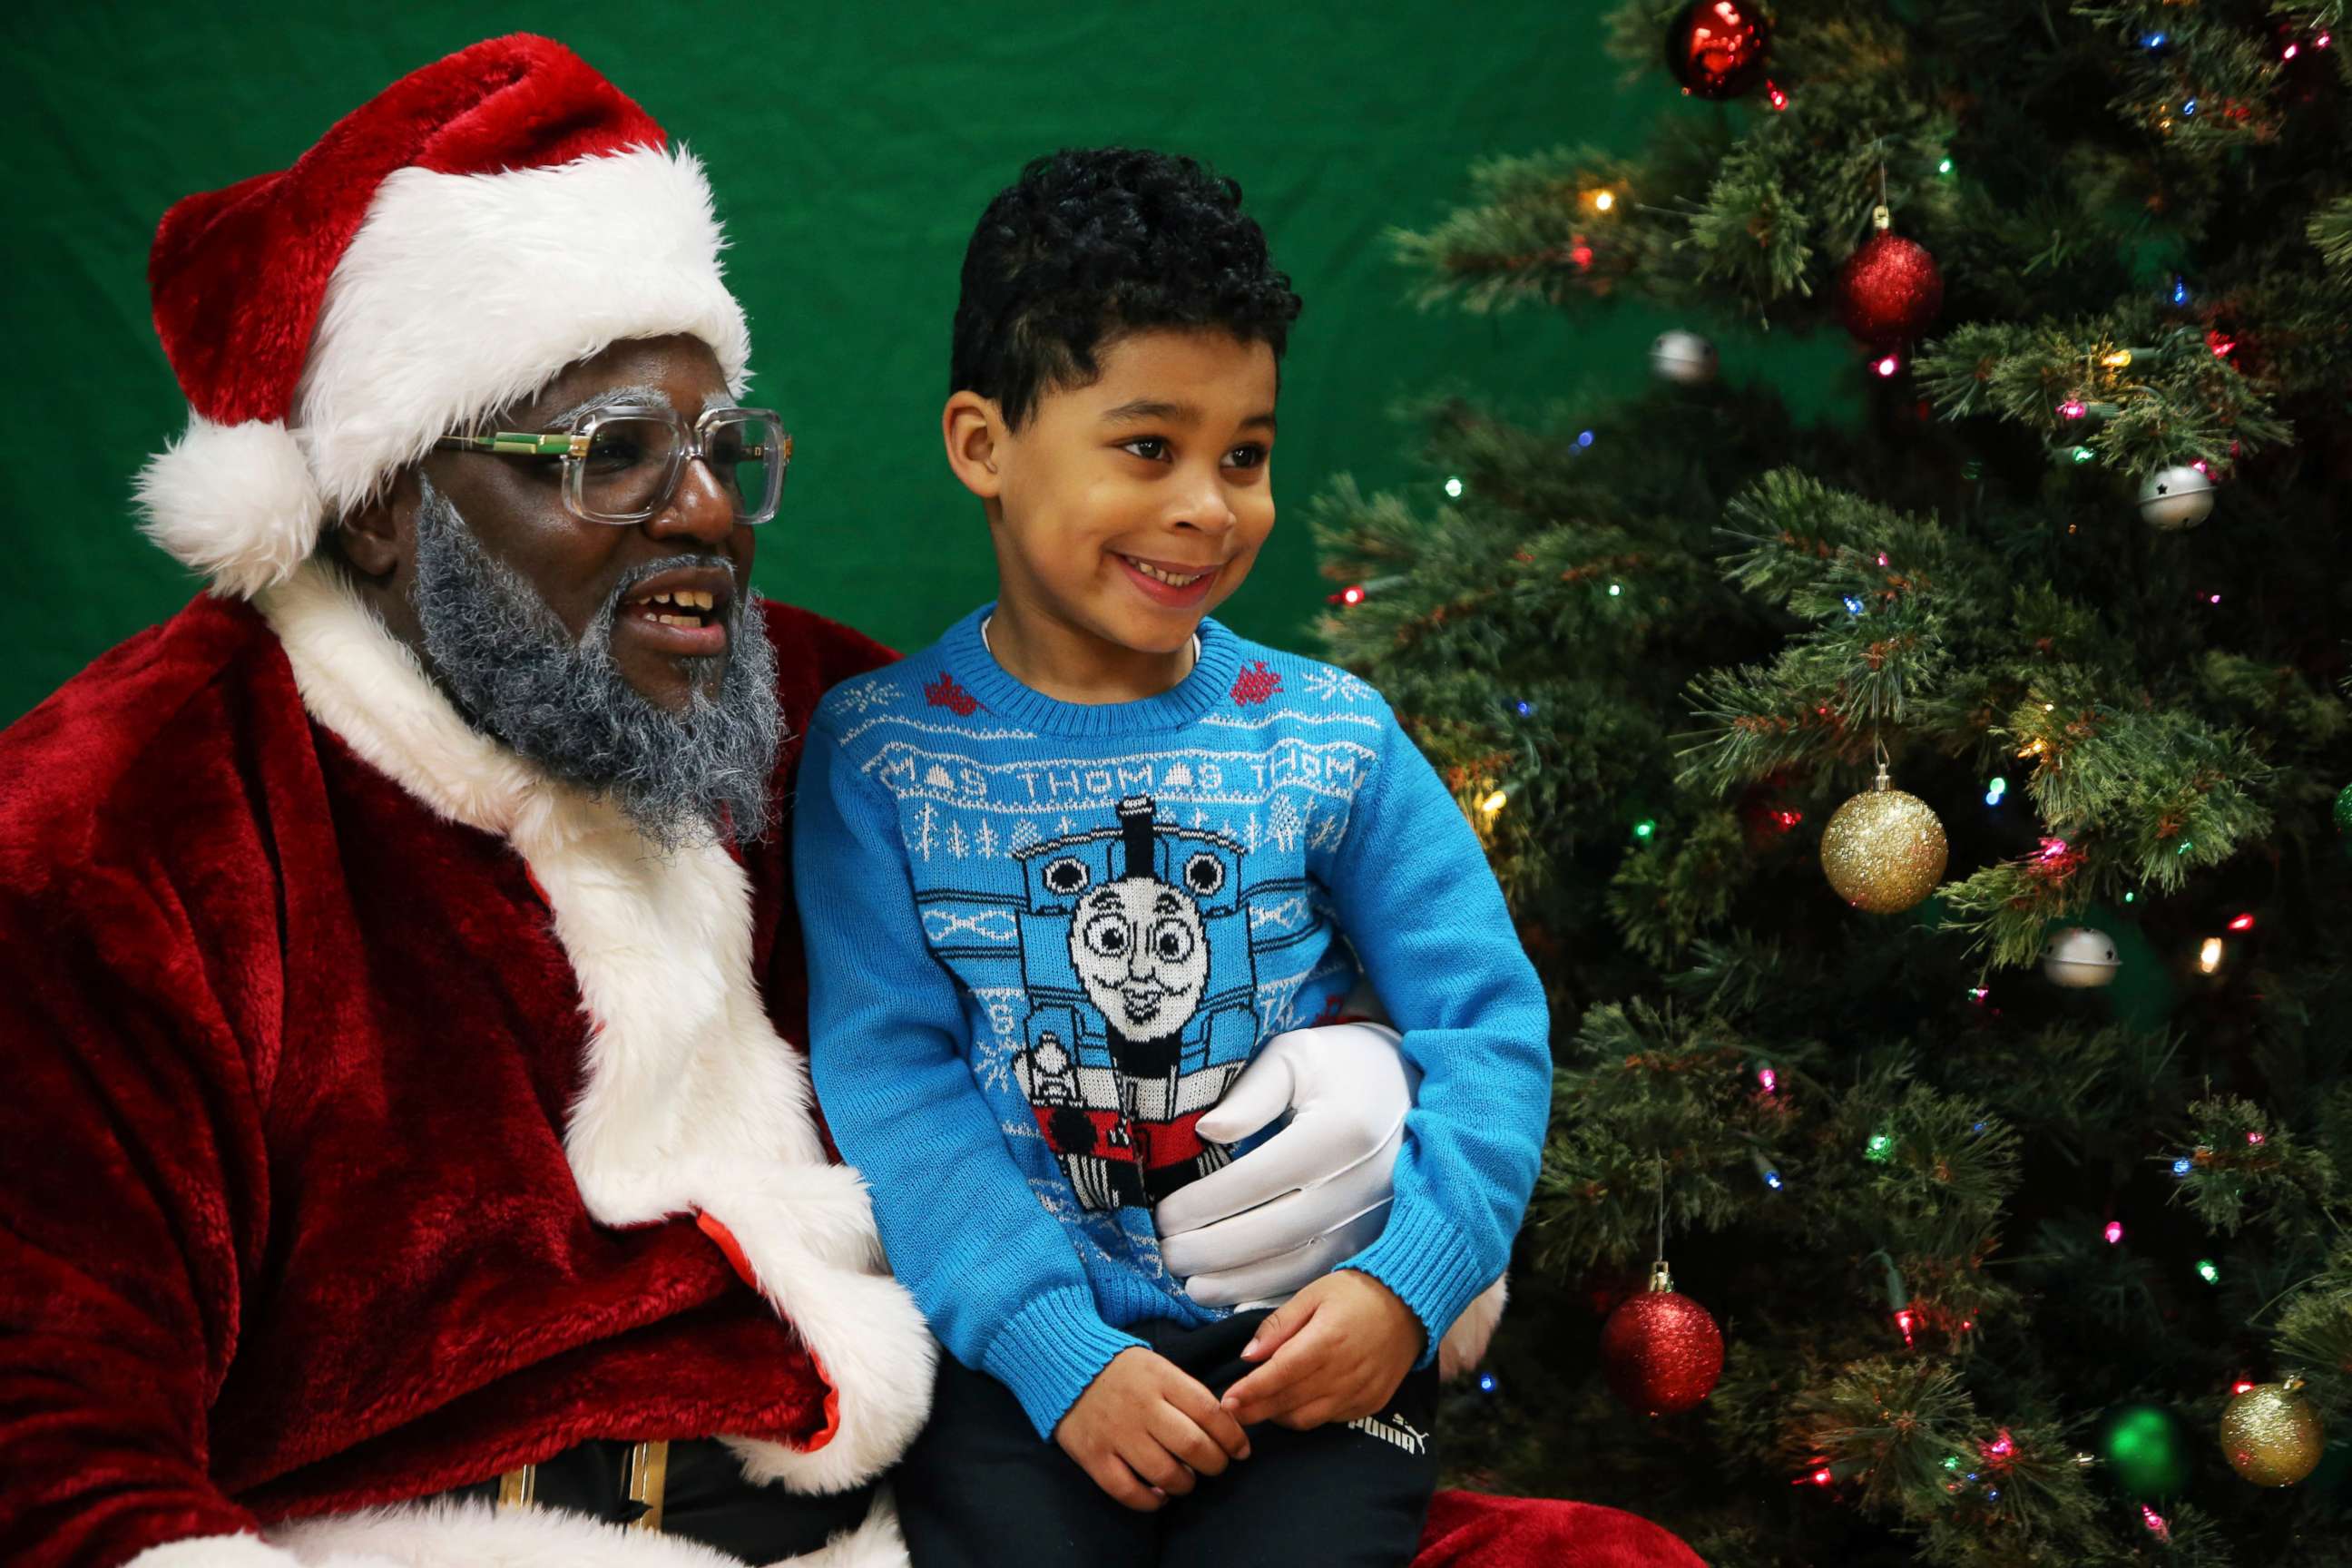 PHOTO: In this Dec. 16, 2018, file photo, a child sits on Santa's lap at the Langston Hughes Performing Arts Institute in Seattle.